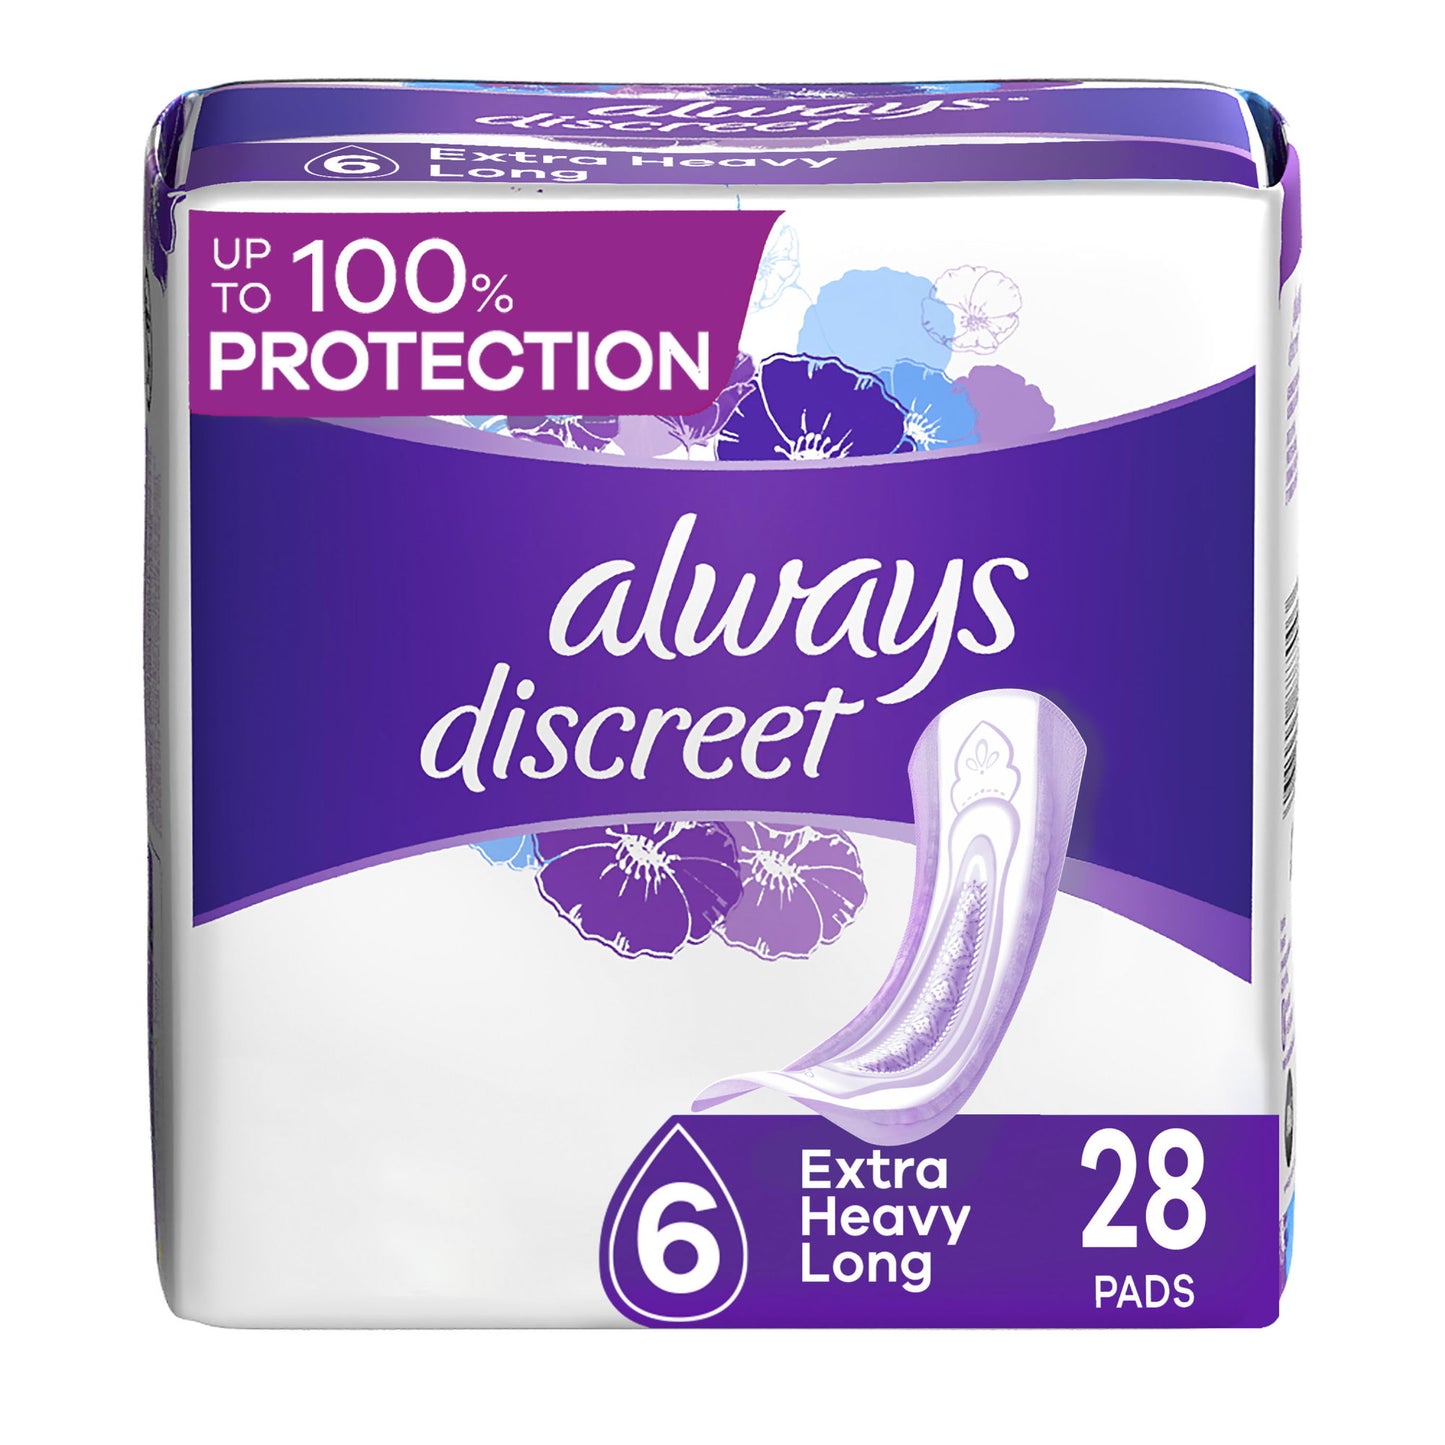 Discreet Extra Heavy Long Incontinence Pads